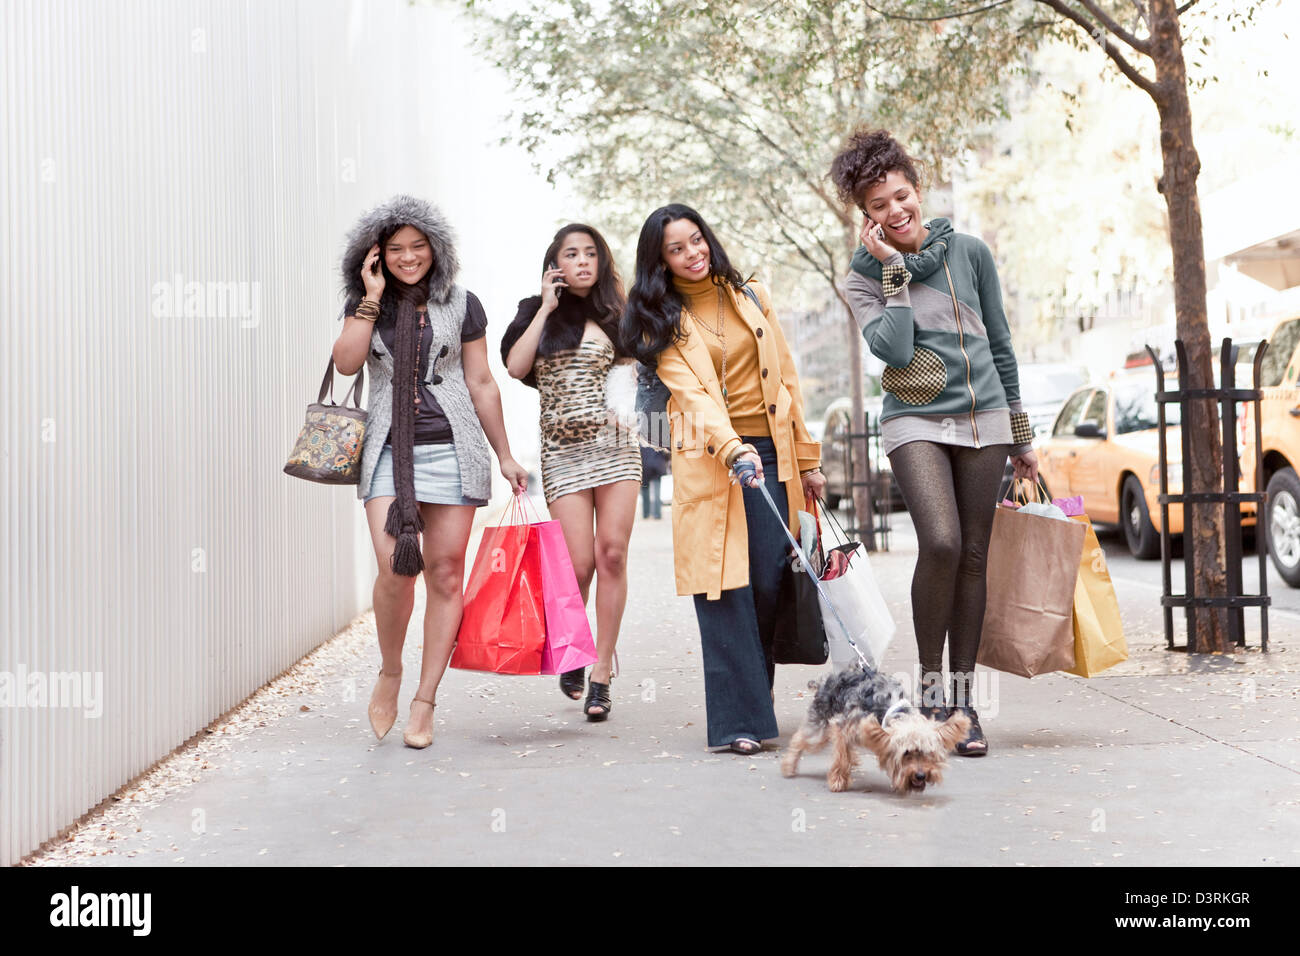 group of women friends talking on cell phone while walking Stock Photo